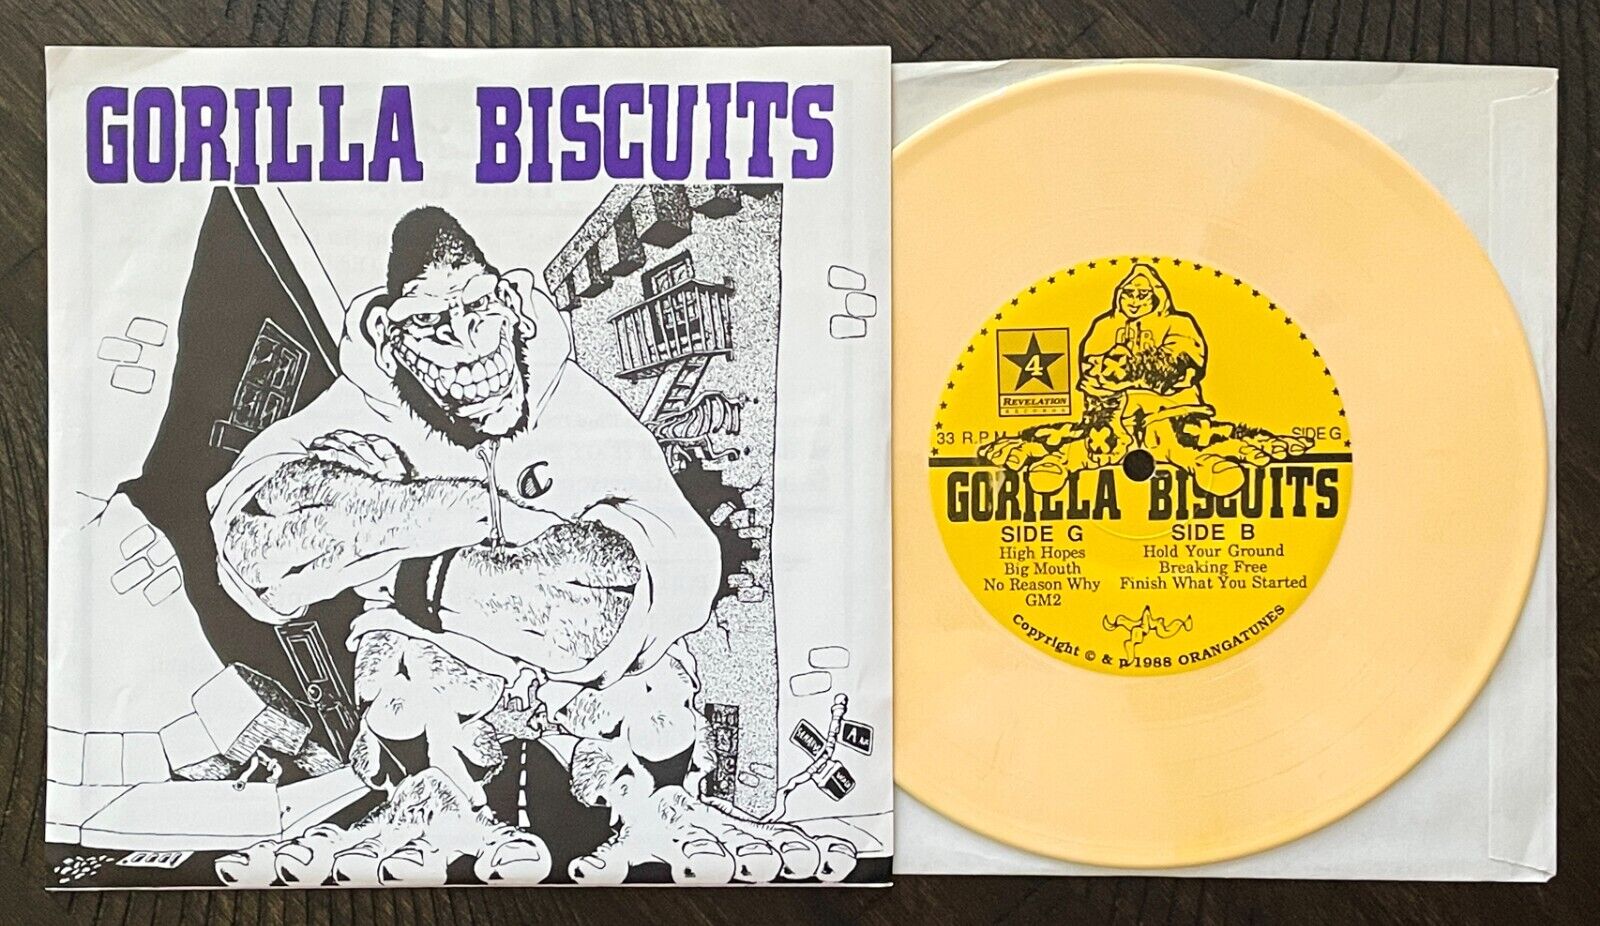 GORILLA BISCUITS 7" EP WHITE YELLOW 1988 KBD Judge Quicksand Youth Of Today sXe